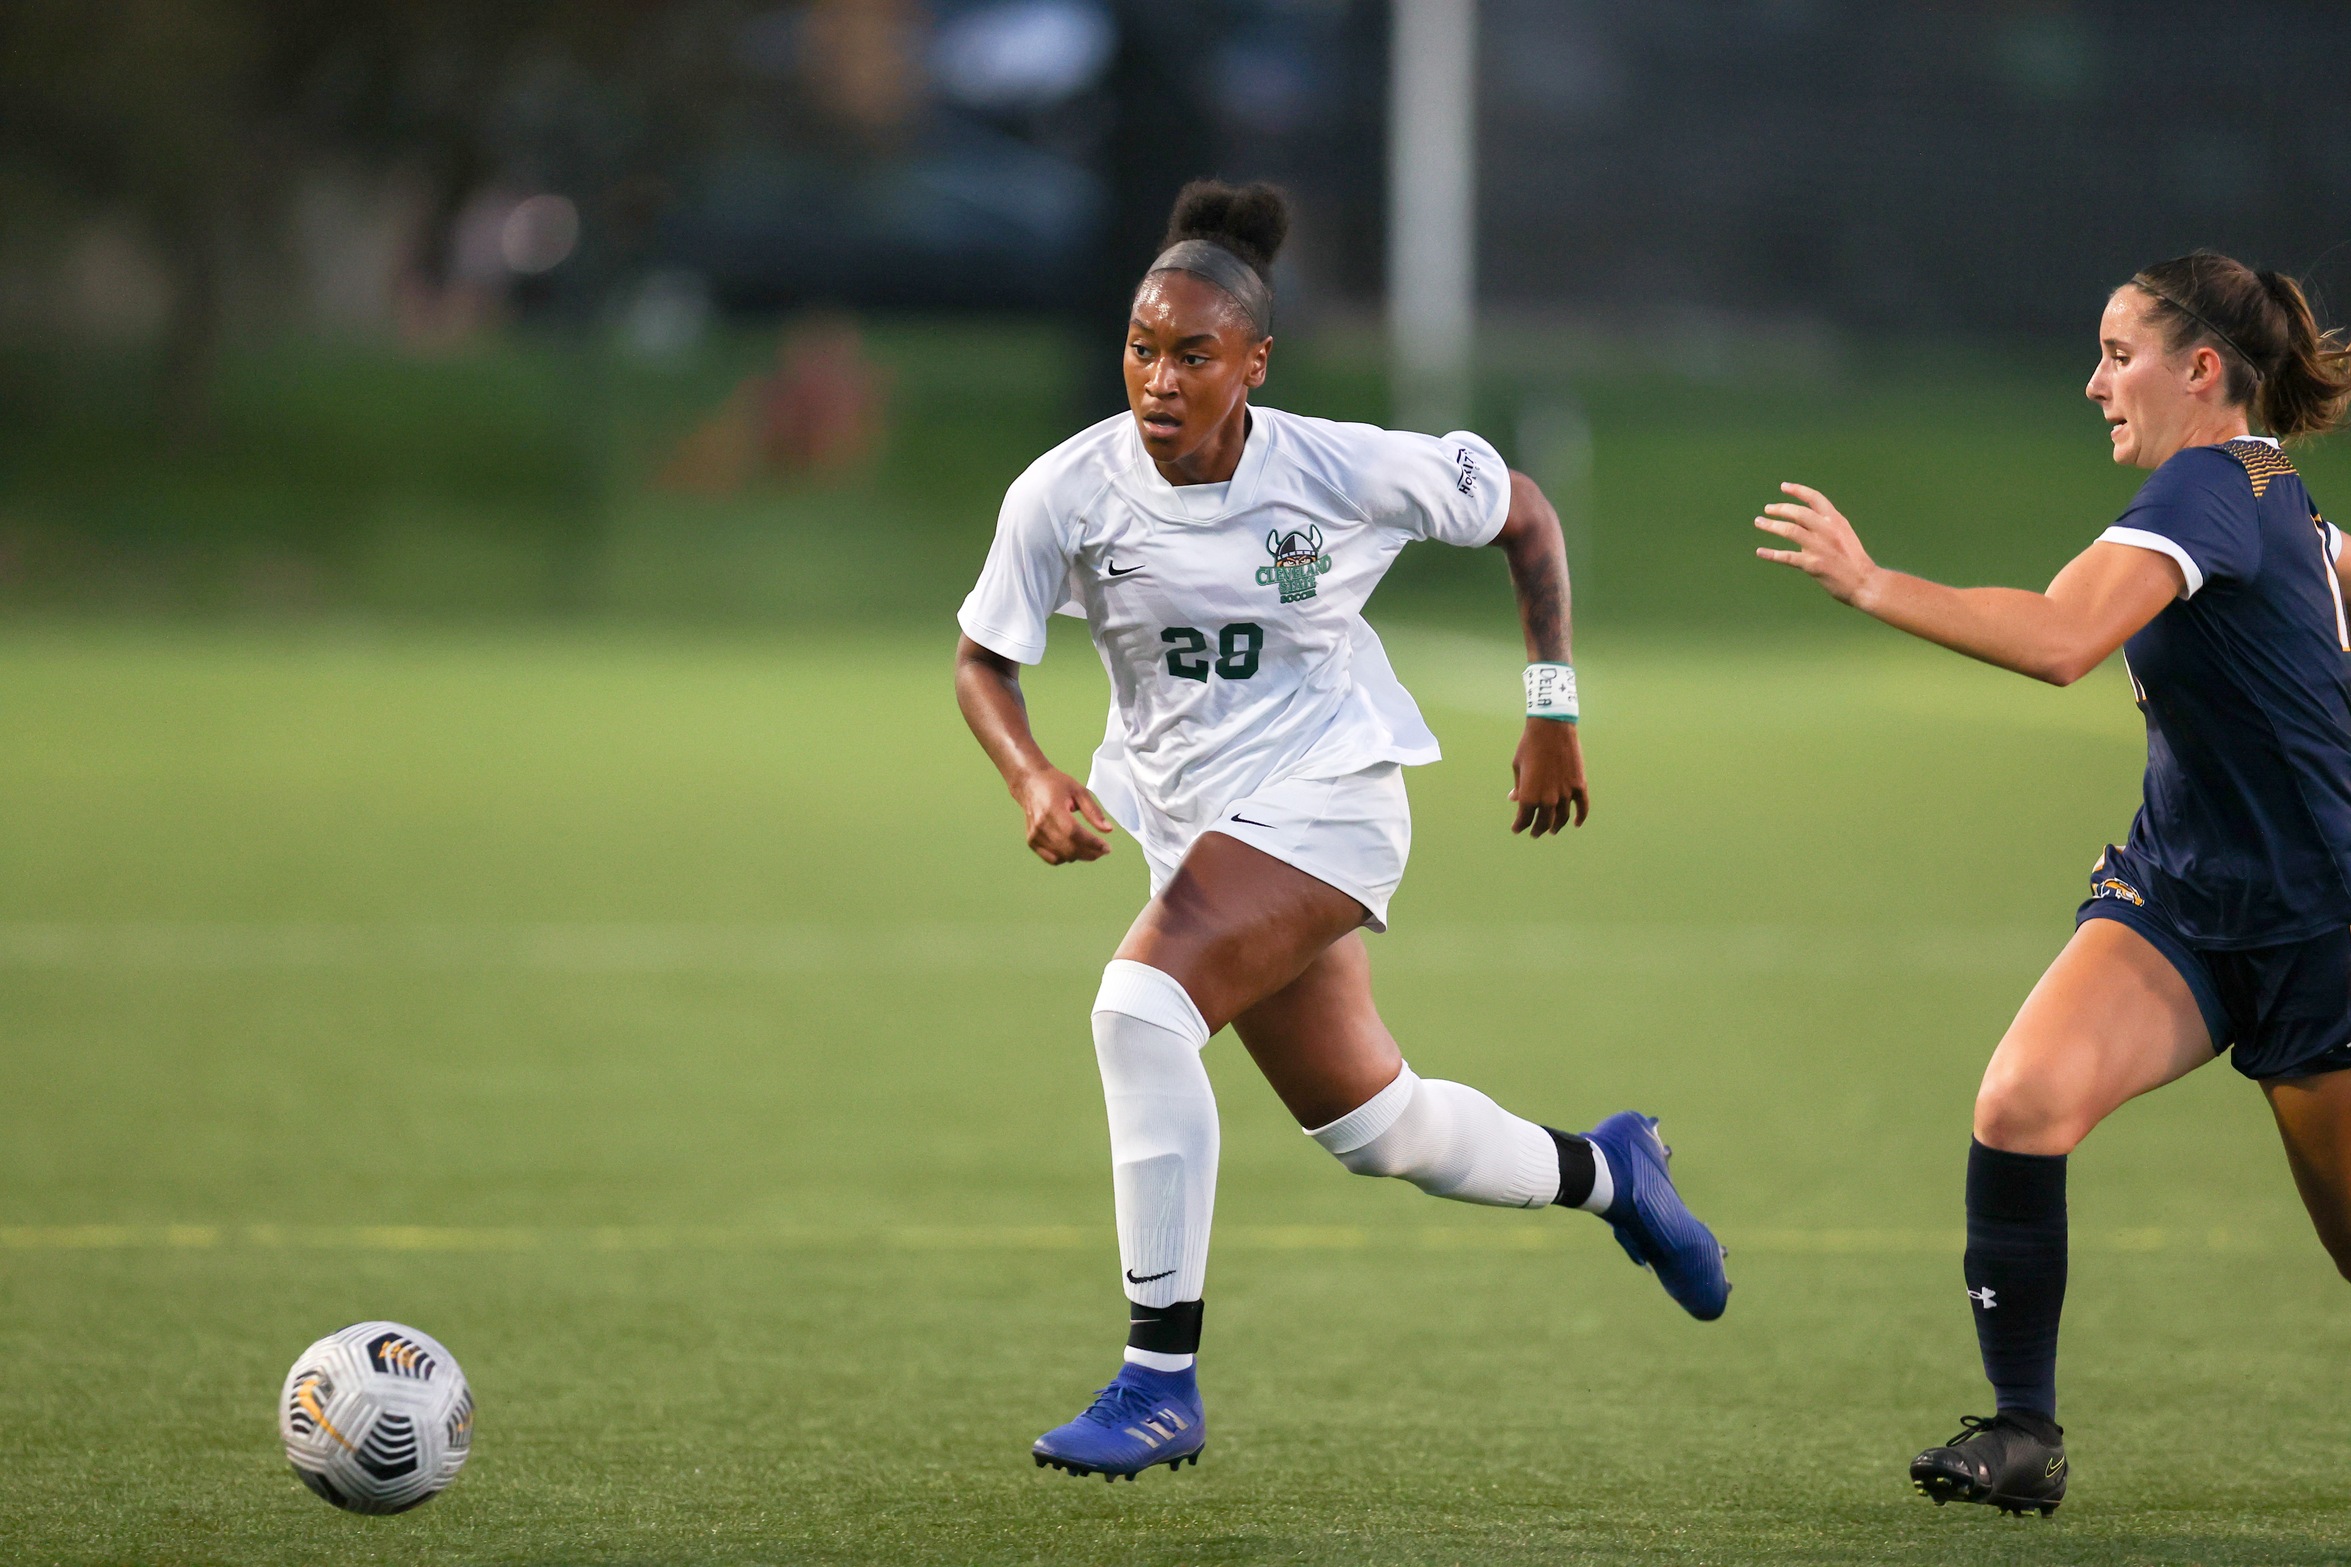 Cleveland State Women's Soccer Concludes Regular Season at Purdue Fort Wayne